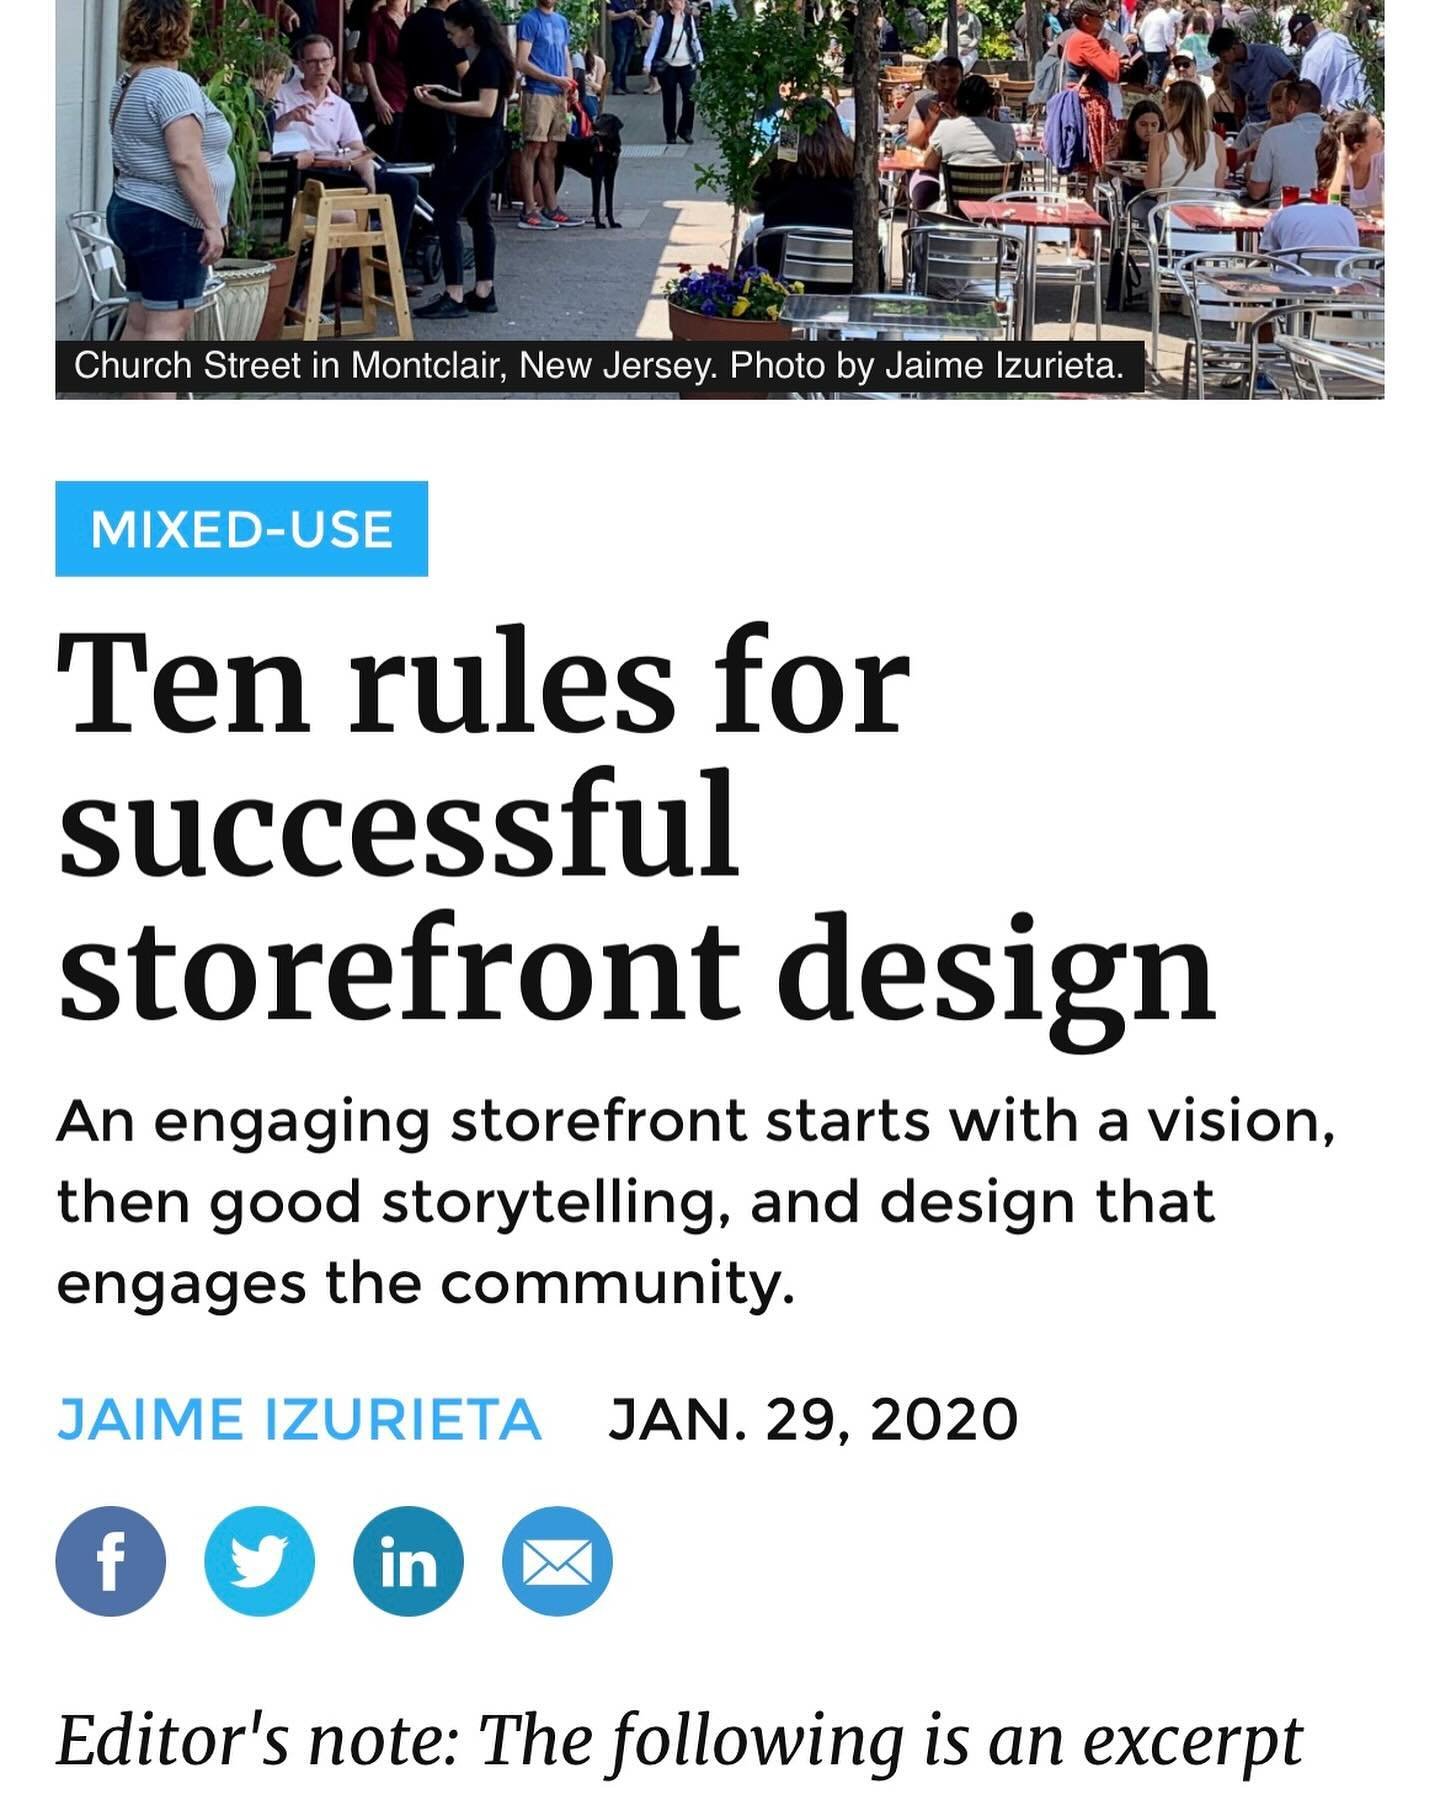 We're getting ready to put in the new storefronts on Main Street to have them looking great for future tenants! So this article about the importance of creating an experience for your visitors felt timely. Many of our new and long-term downtown busin